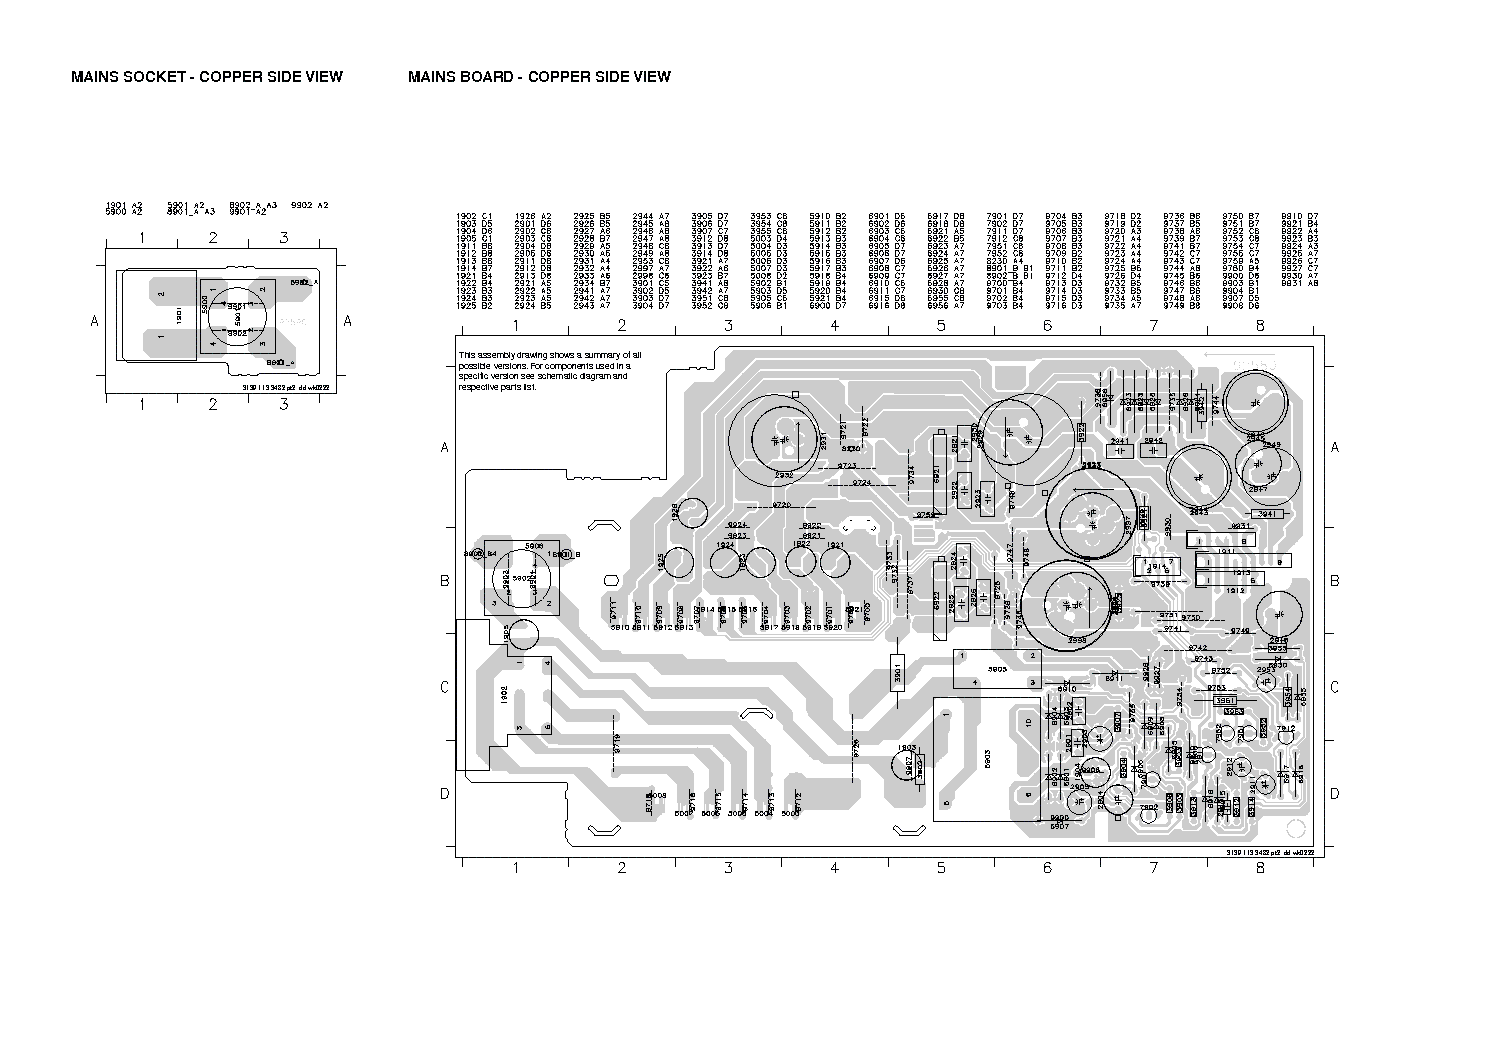 PHILIPS FW-C798 LAYOUT service manual (2nd page)